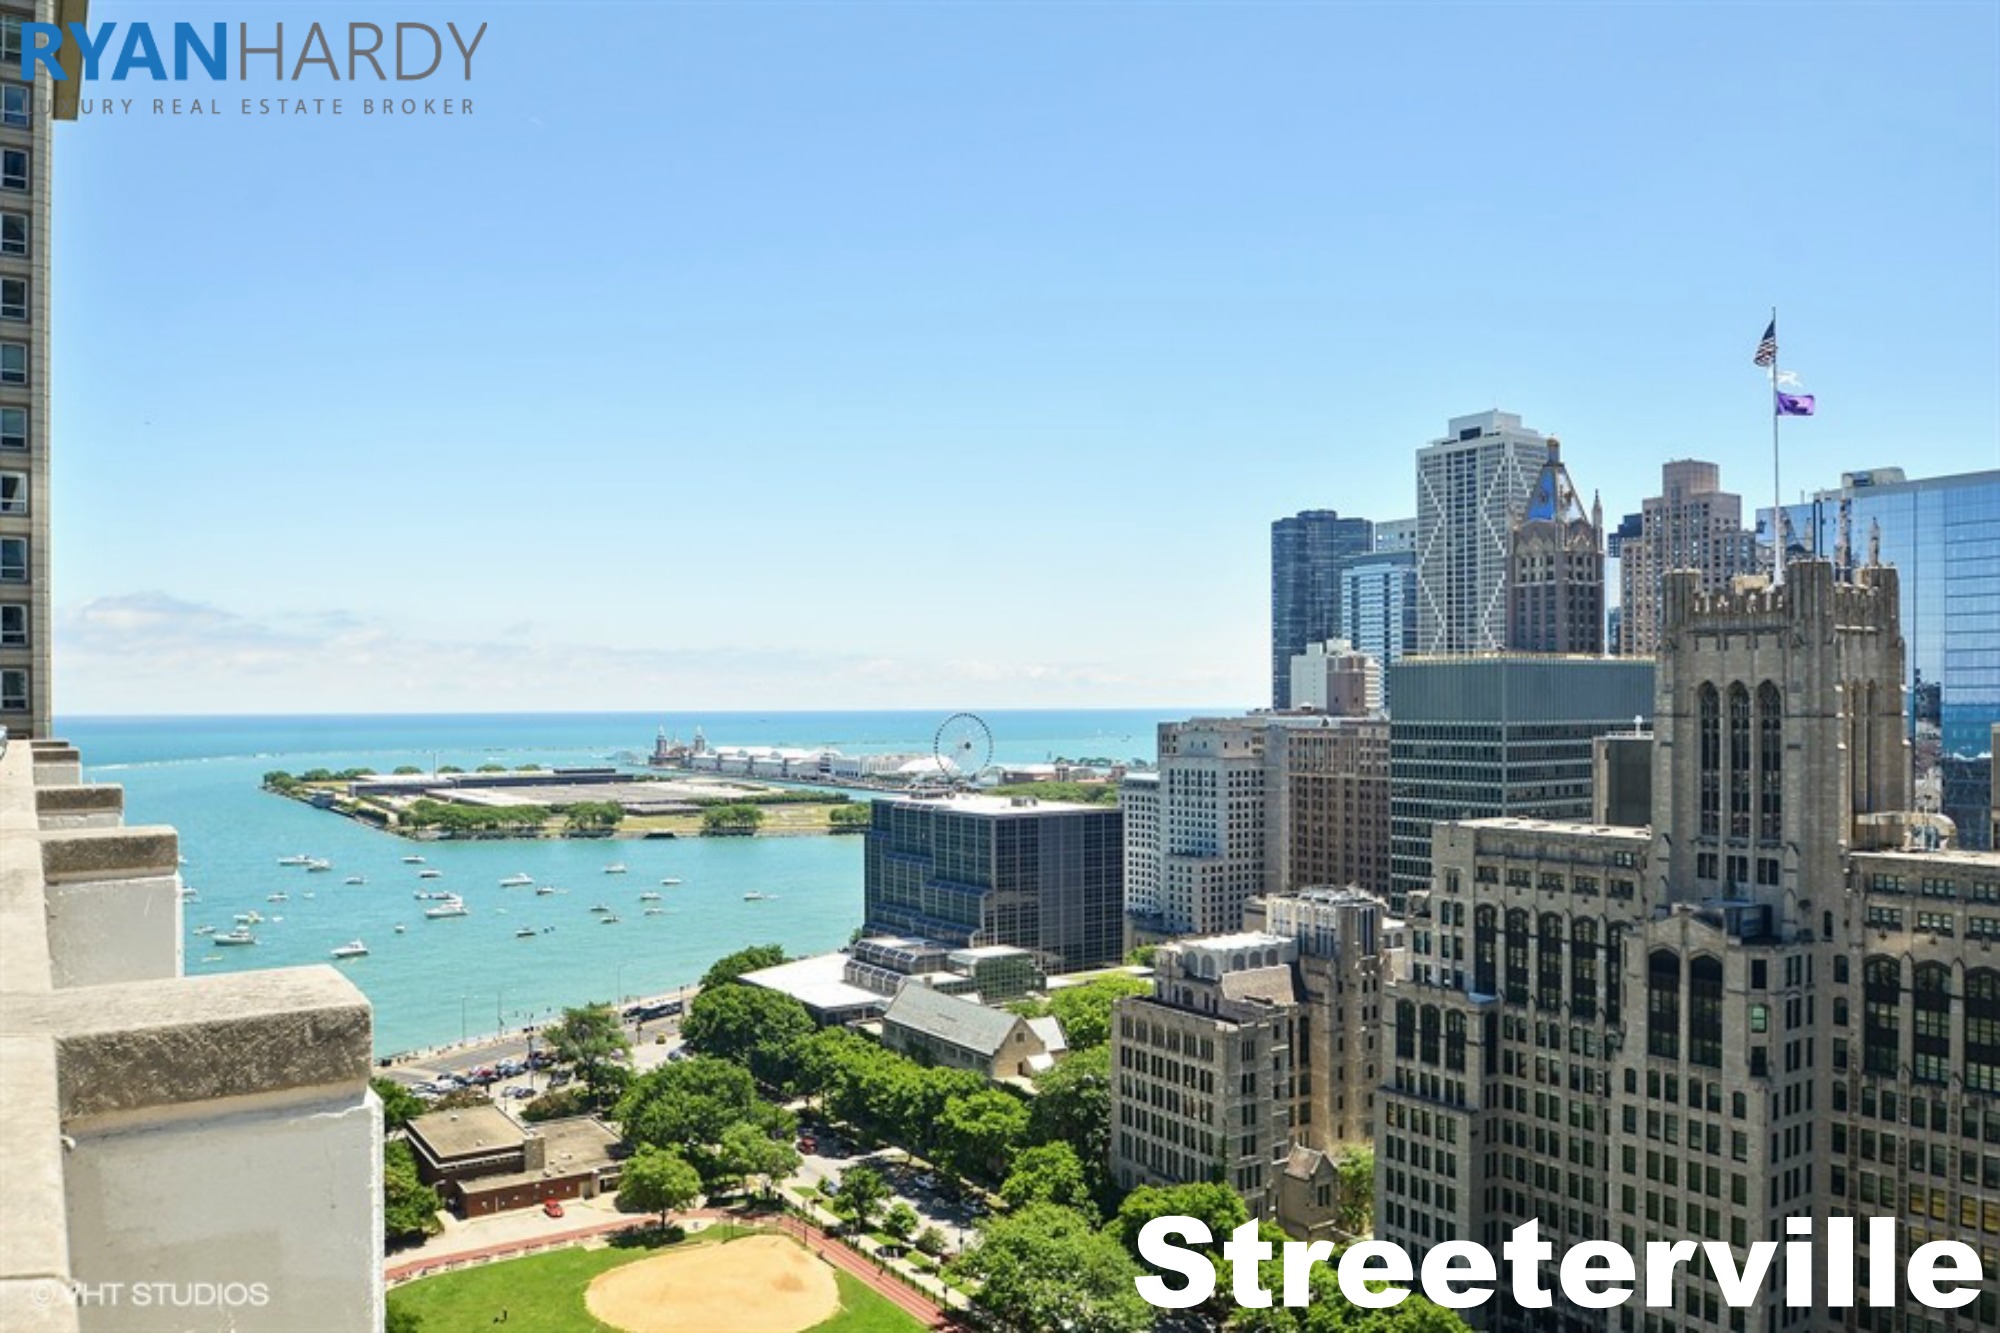 Streeterville condos for Sale Real Estate